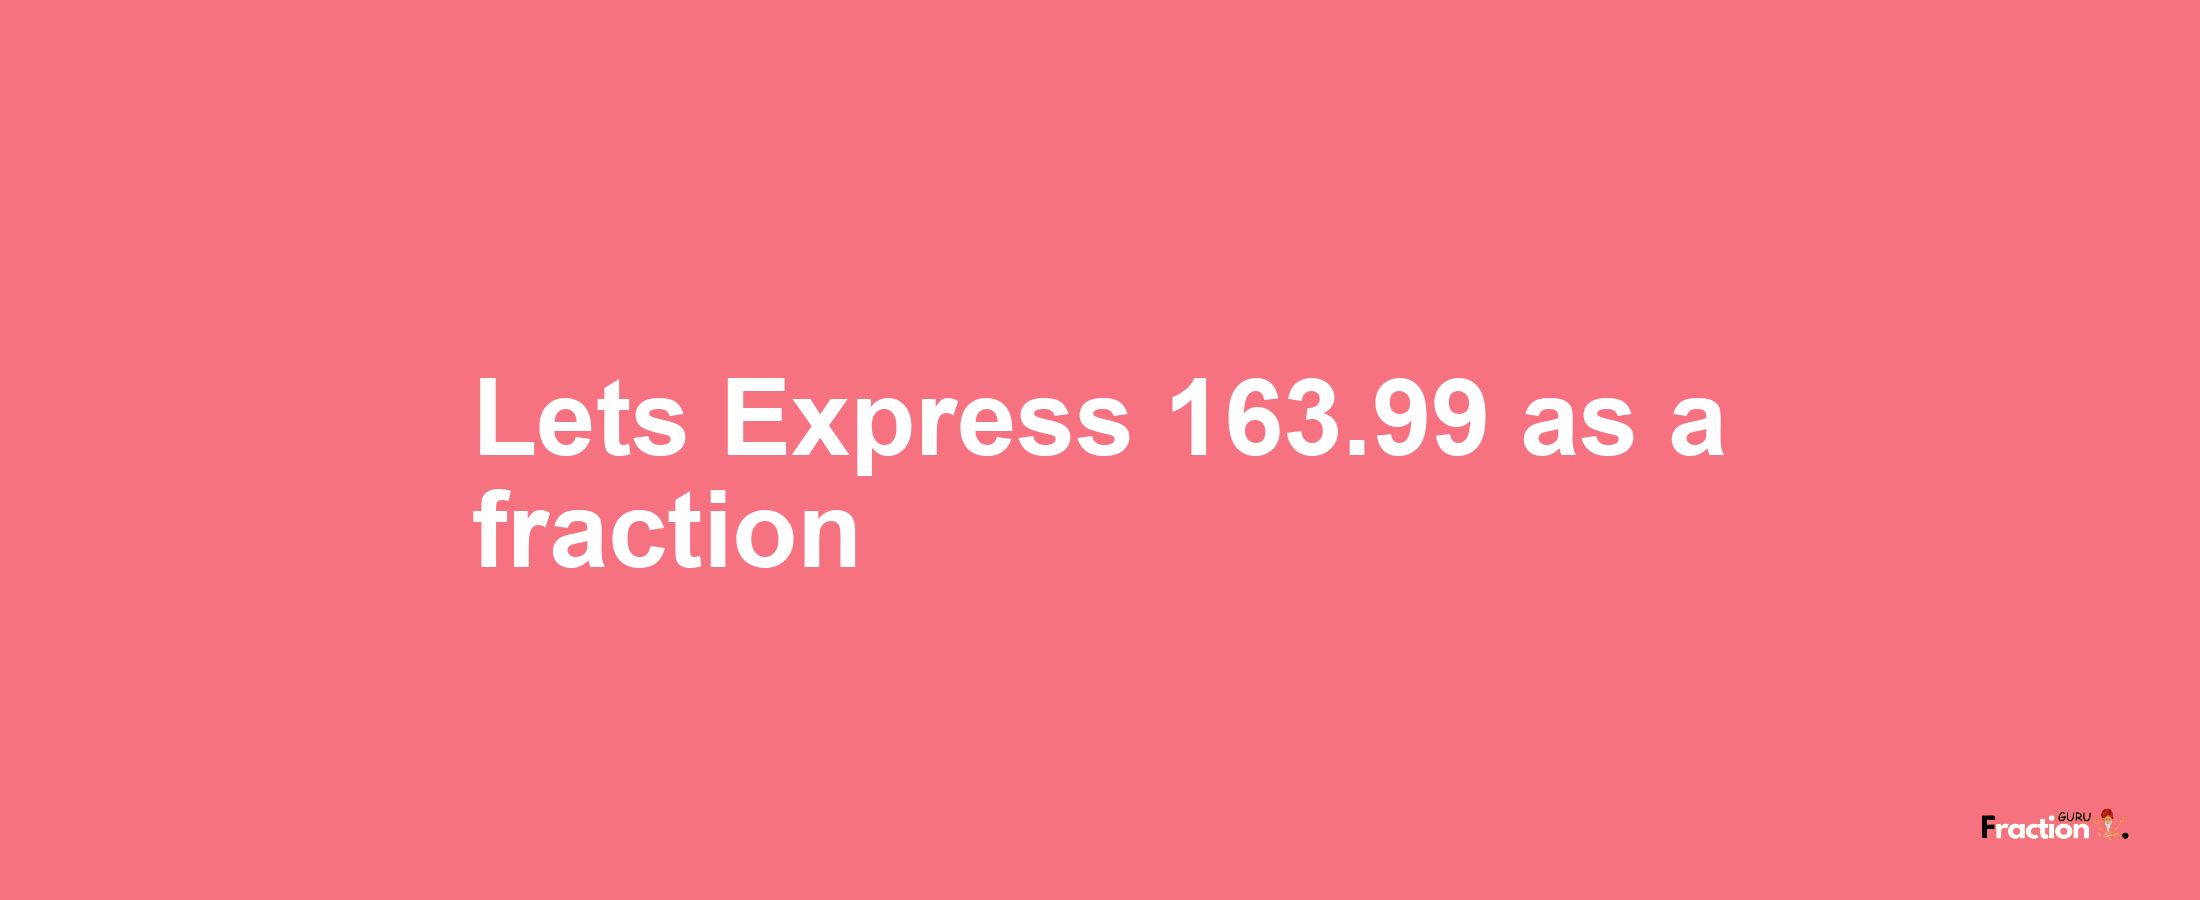 Lets Express 163.99 as afraction